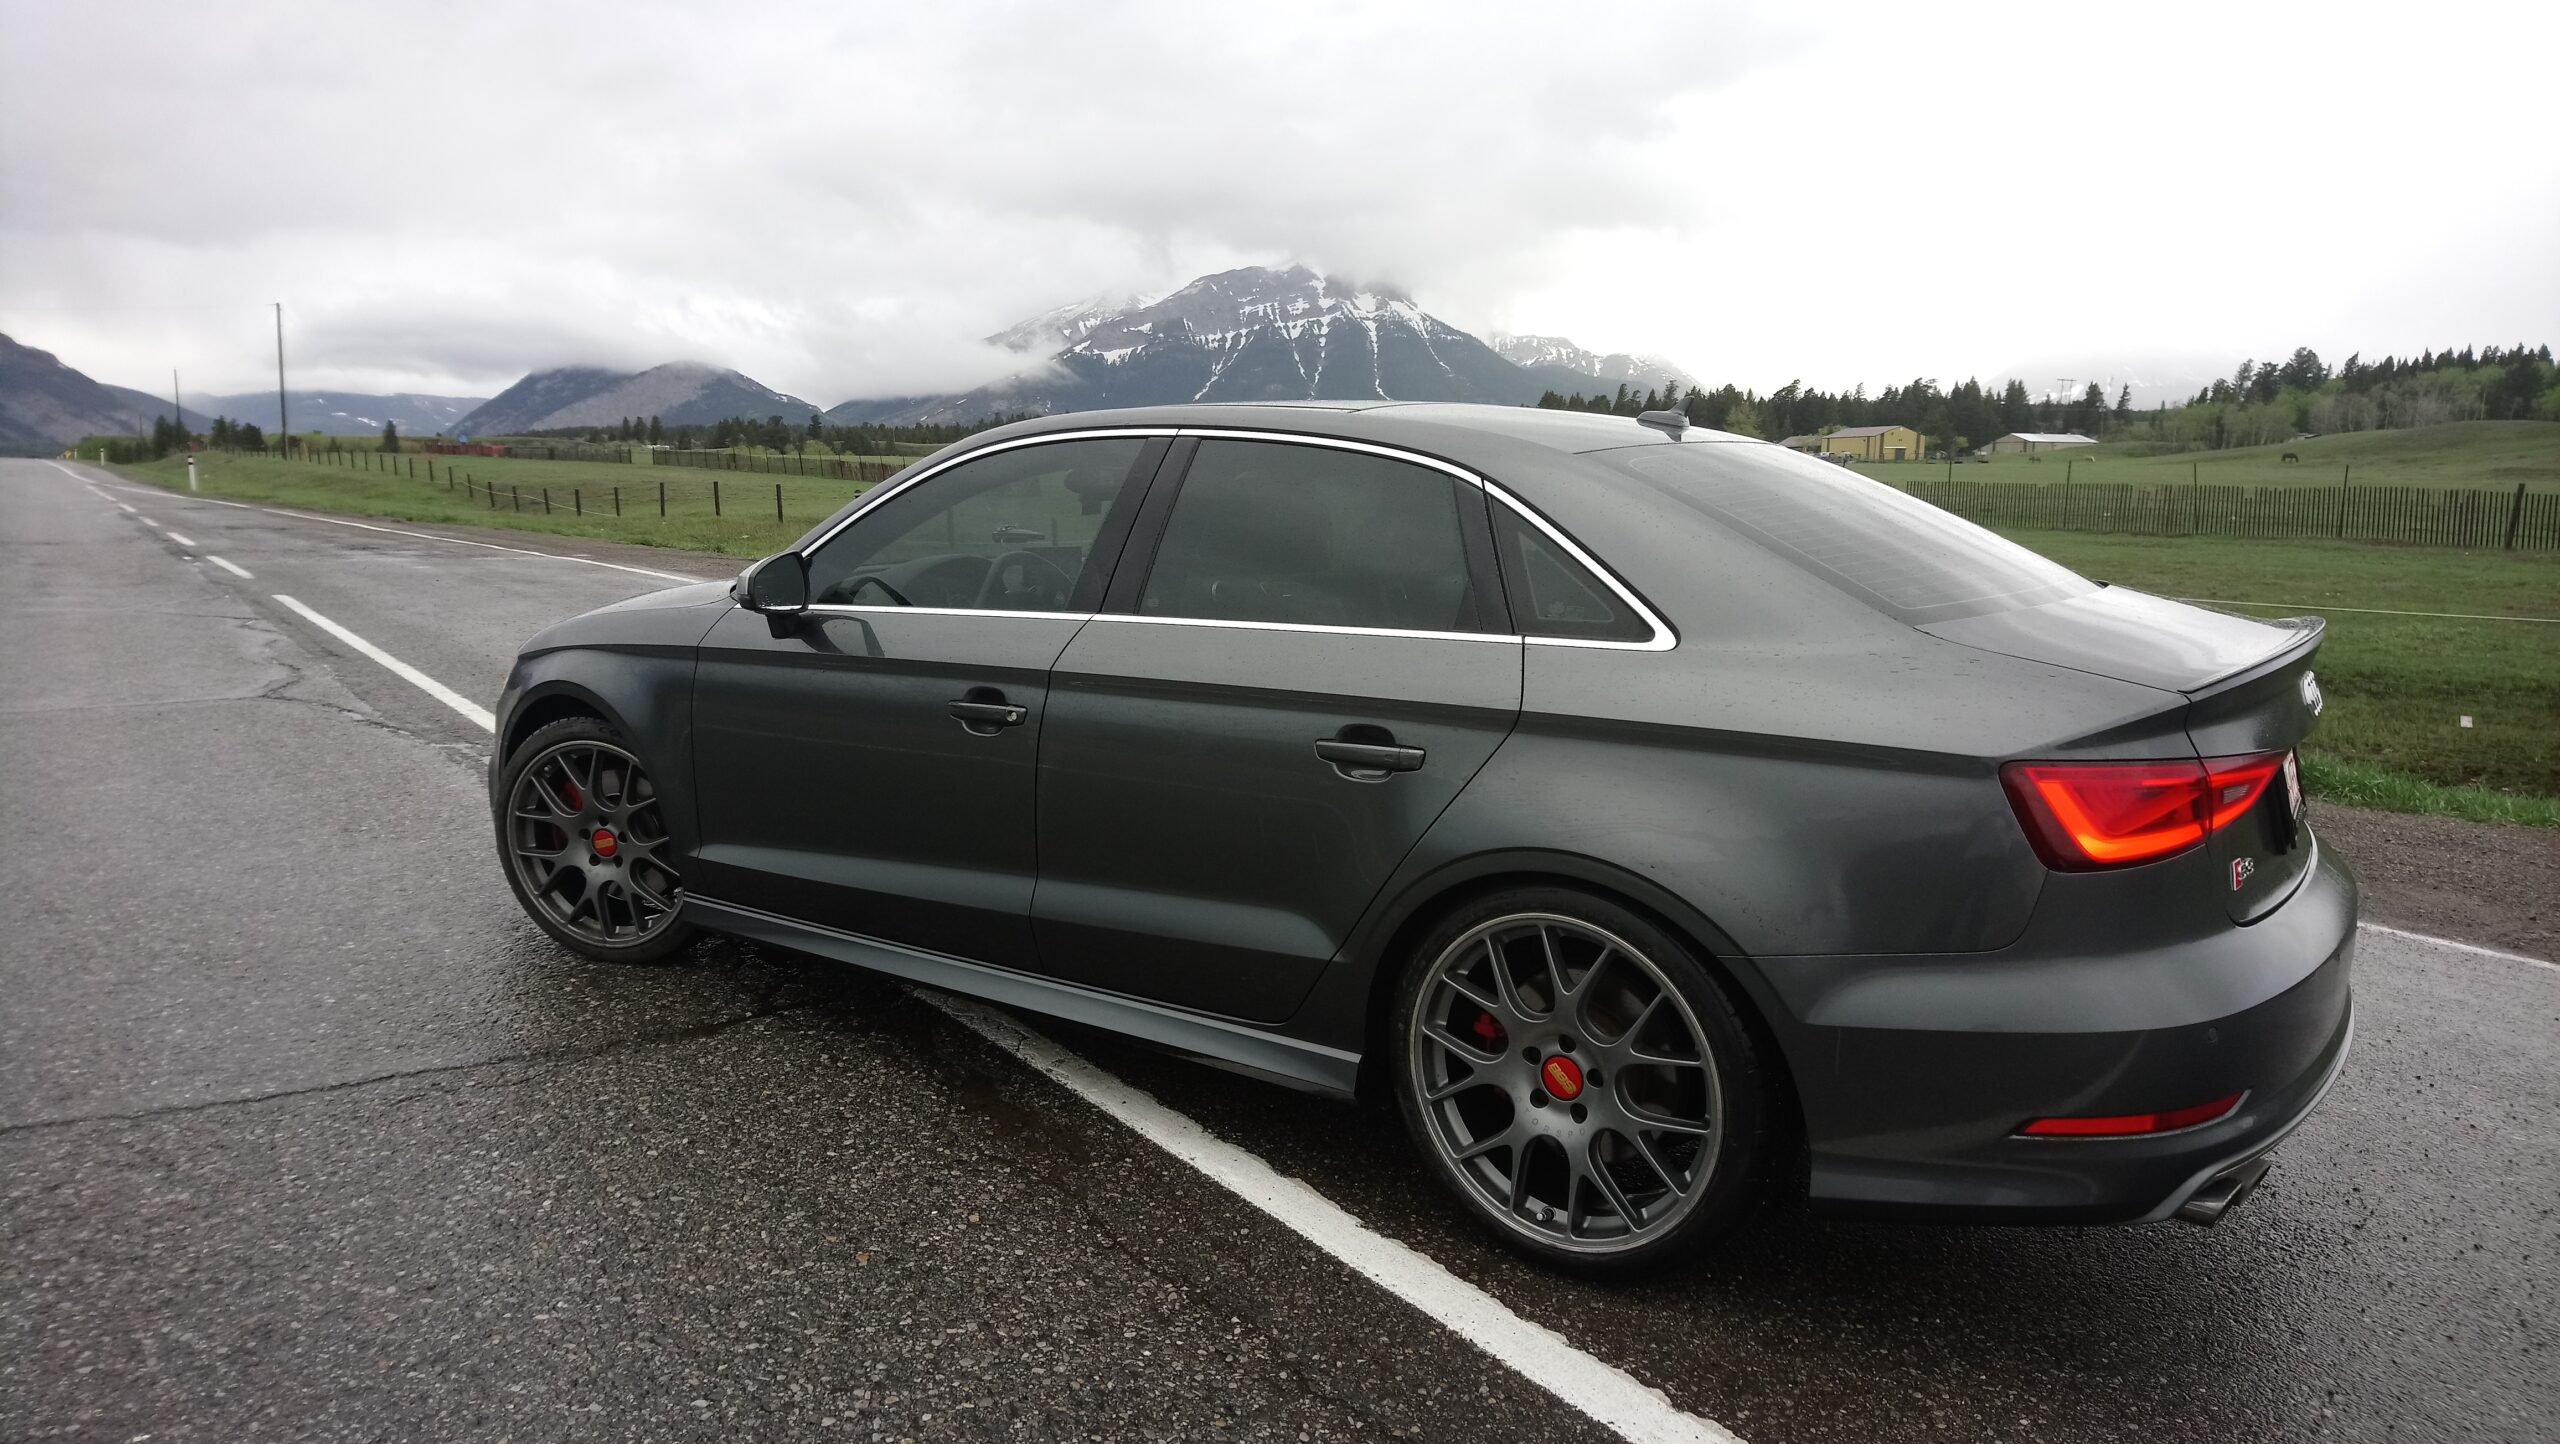 2015+ Audi S3 Review: A Future Used Car Bargain?